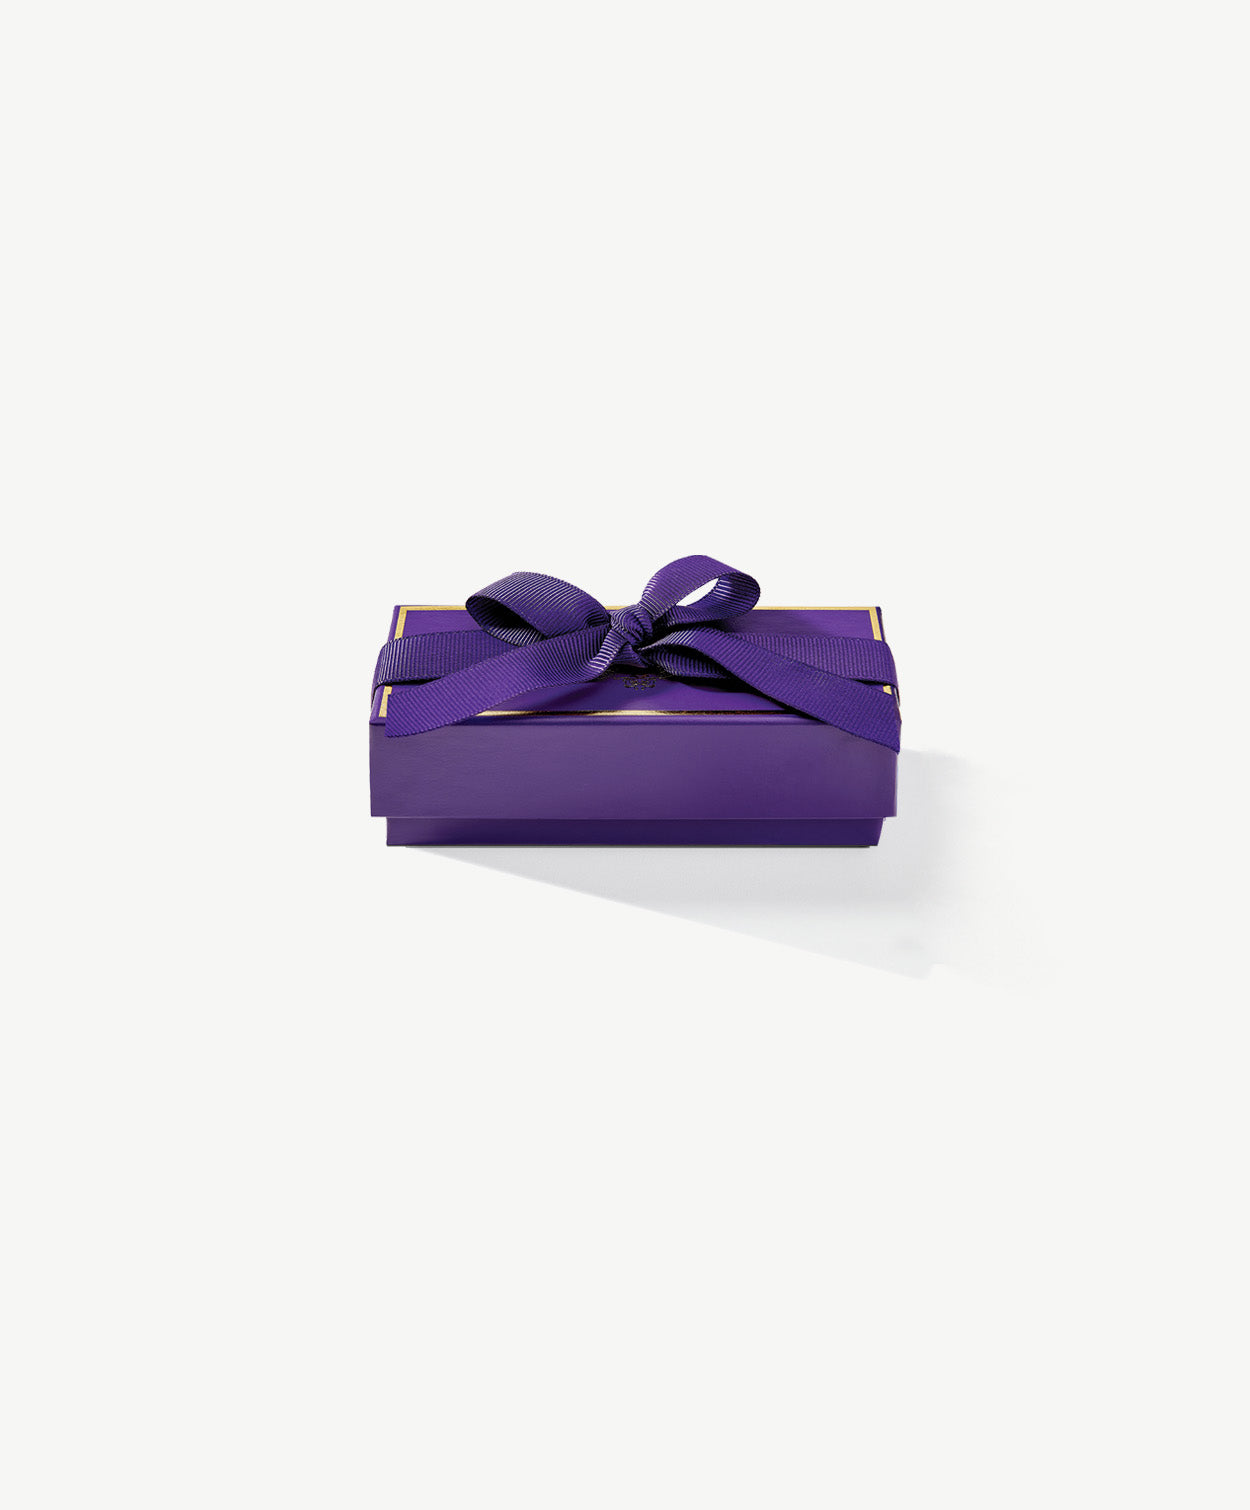 A small, rectangular purple chocolate candy box embossed with gold foil Vosges Haut-Chocolat logo sits closed on a grey background.